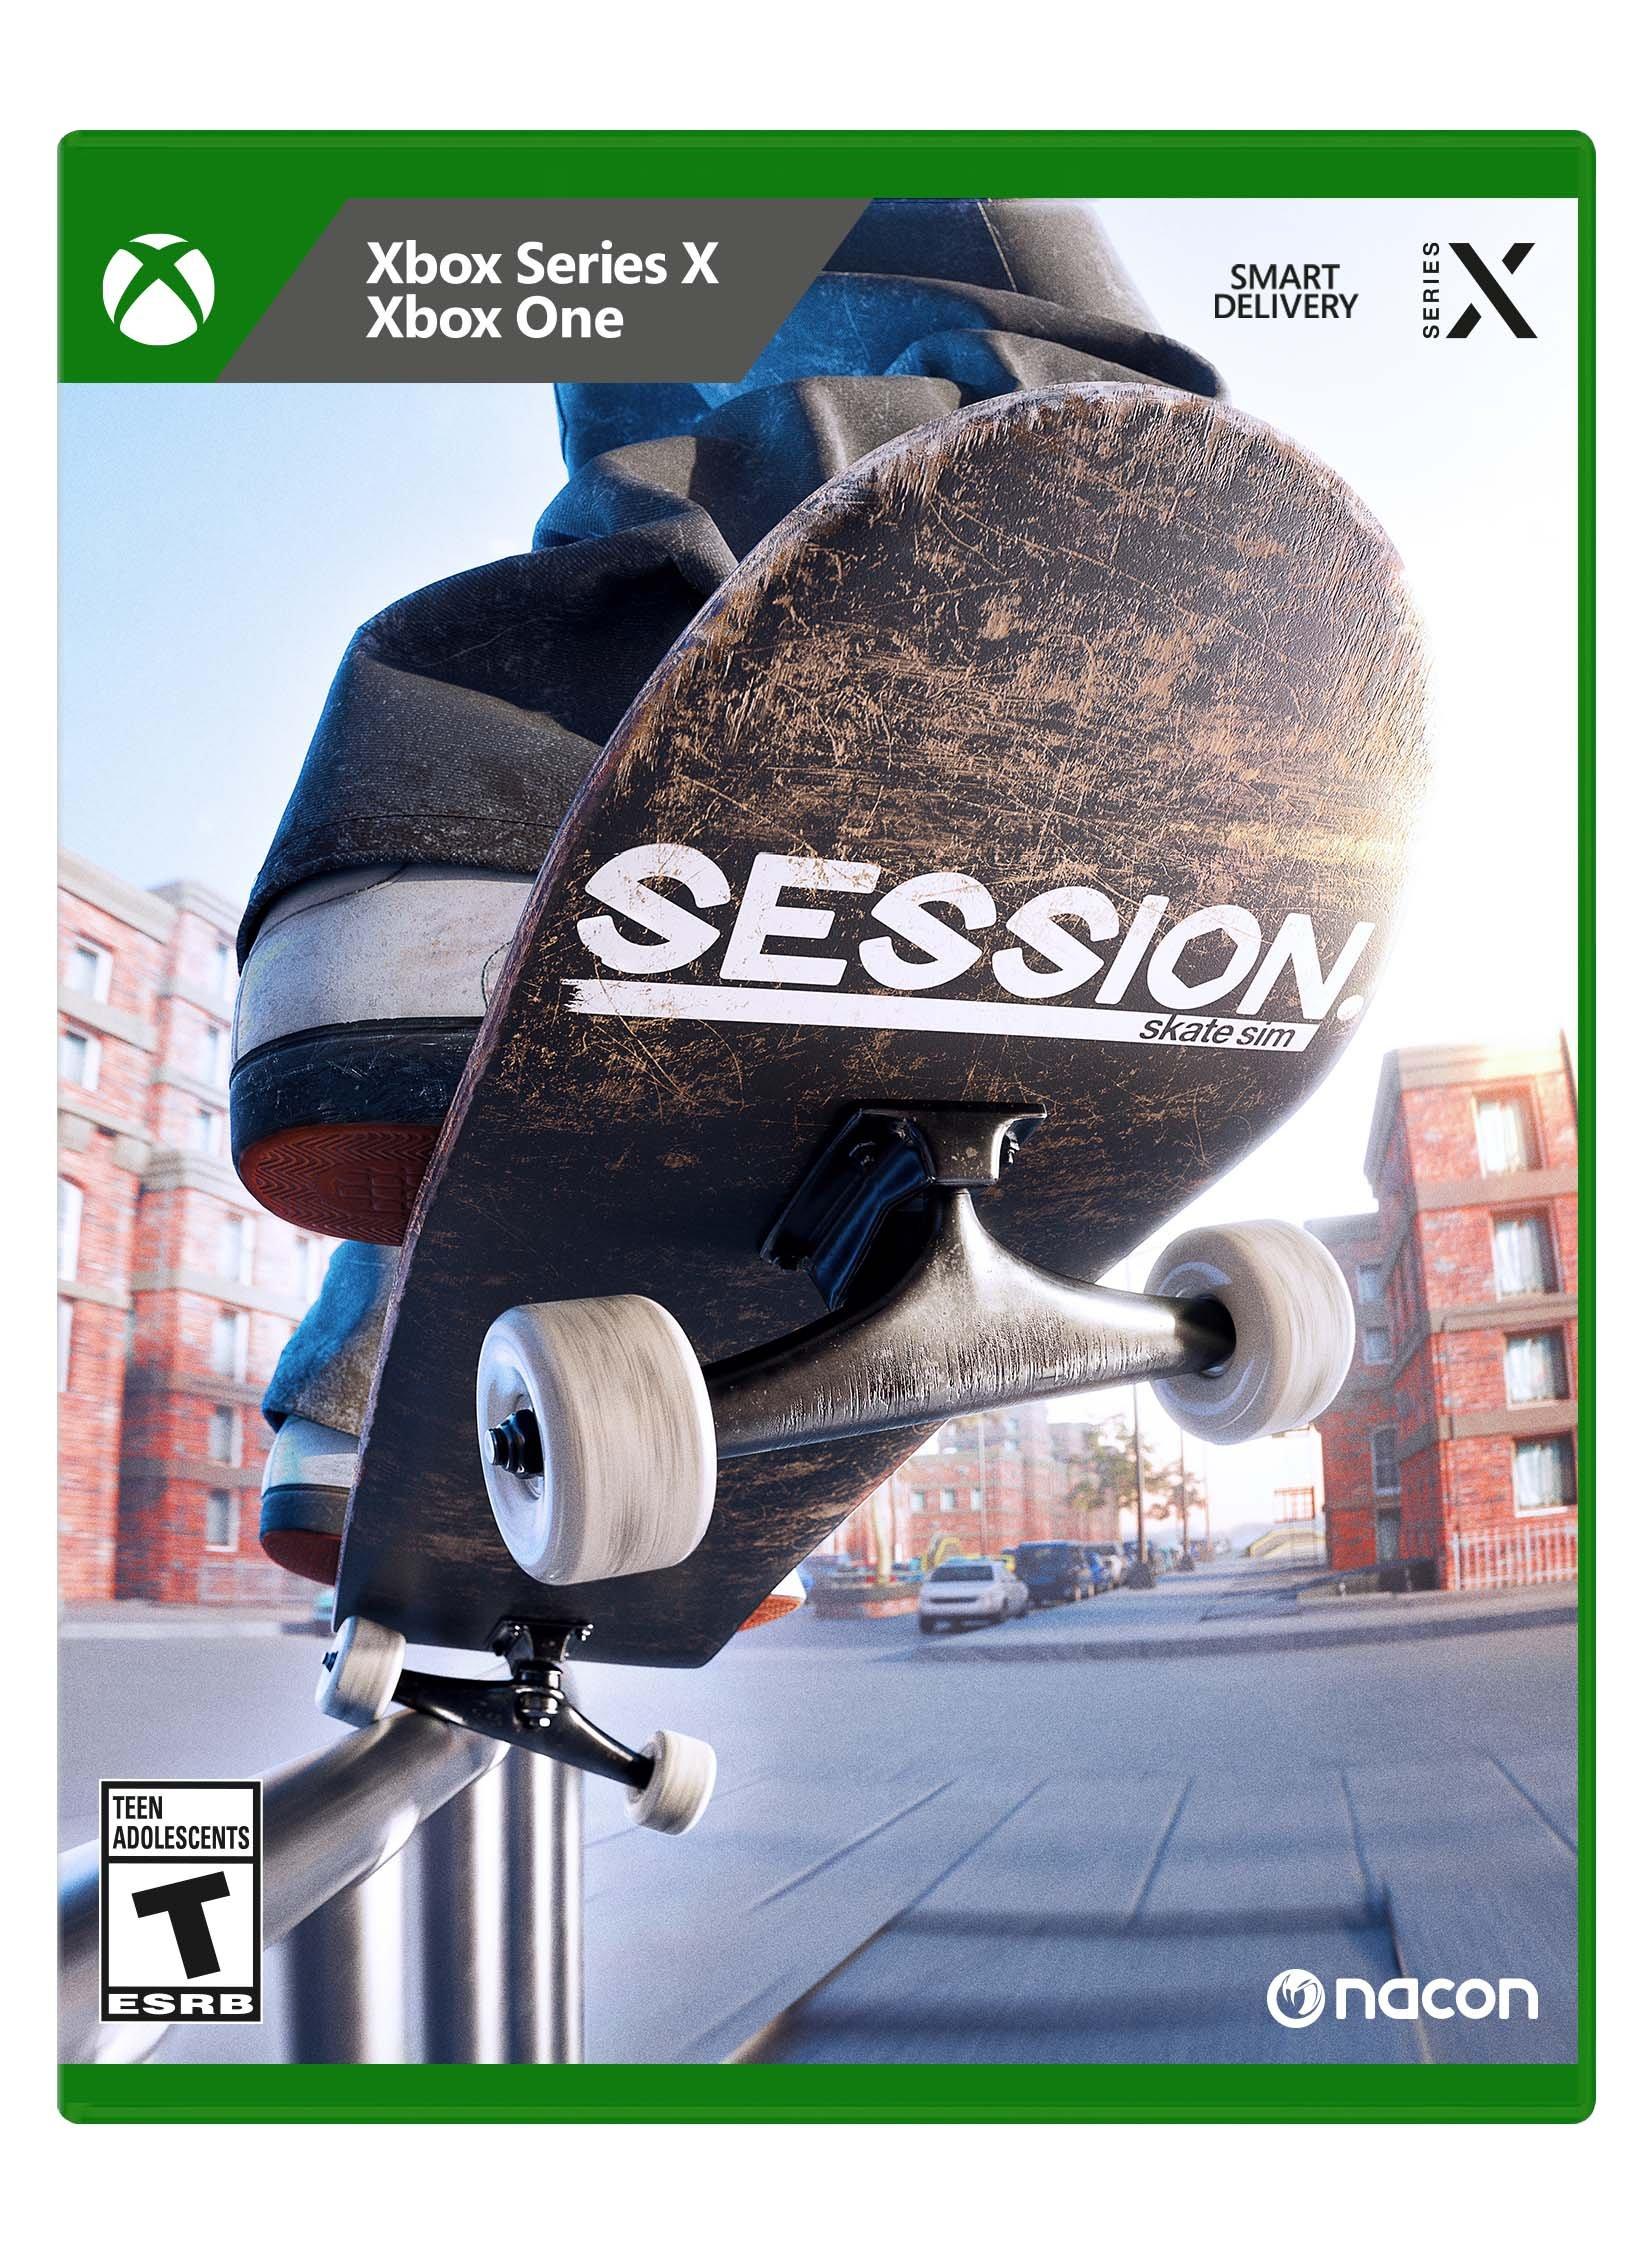 Skate 2 [Xbox 360 - Download Code] : : PC & Video Games